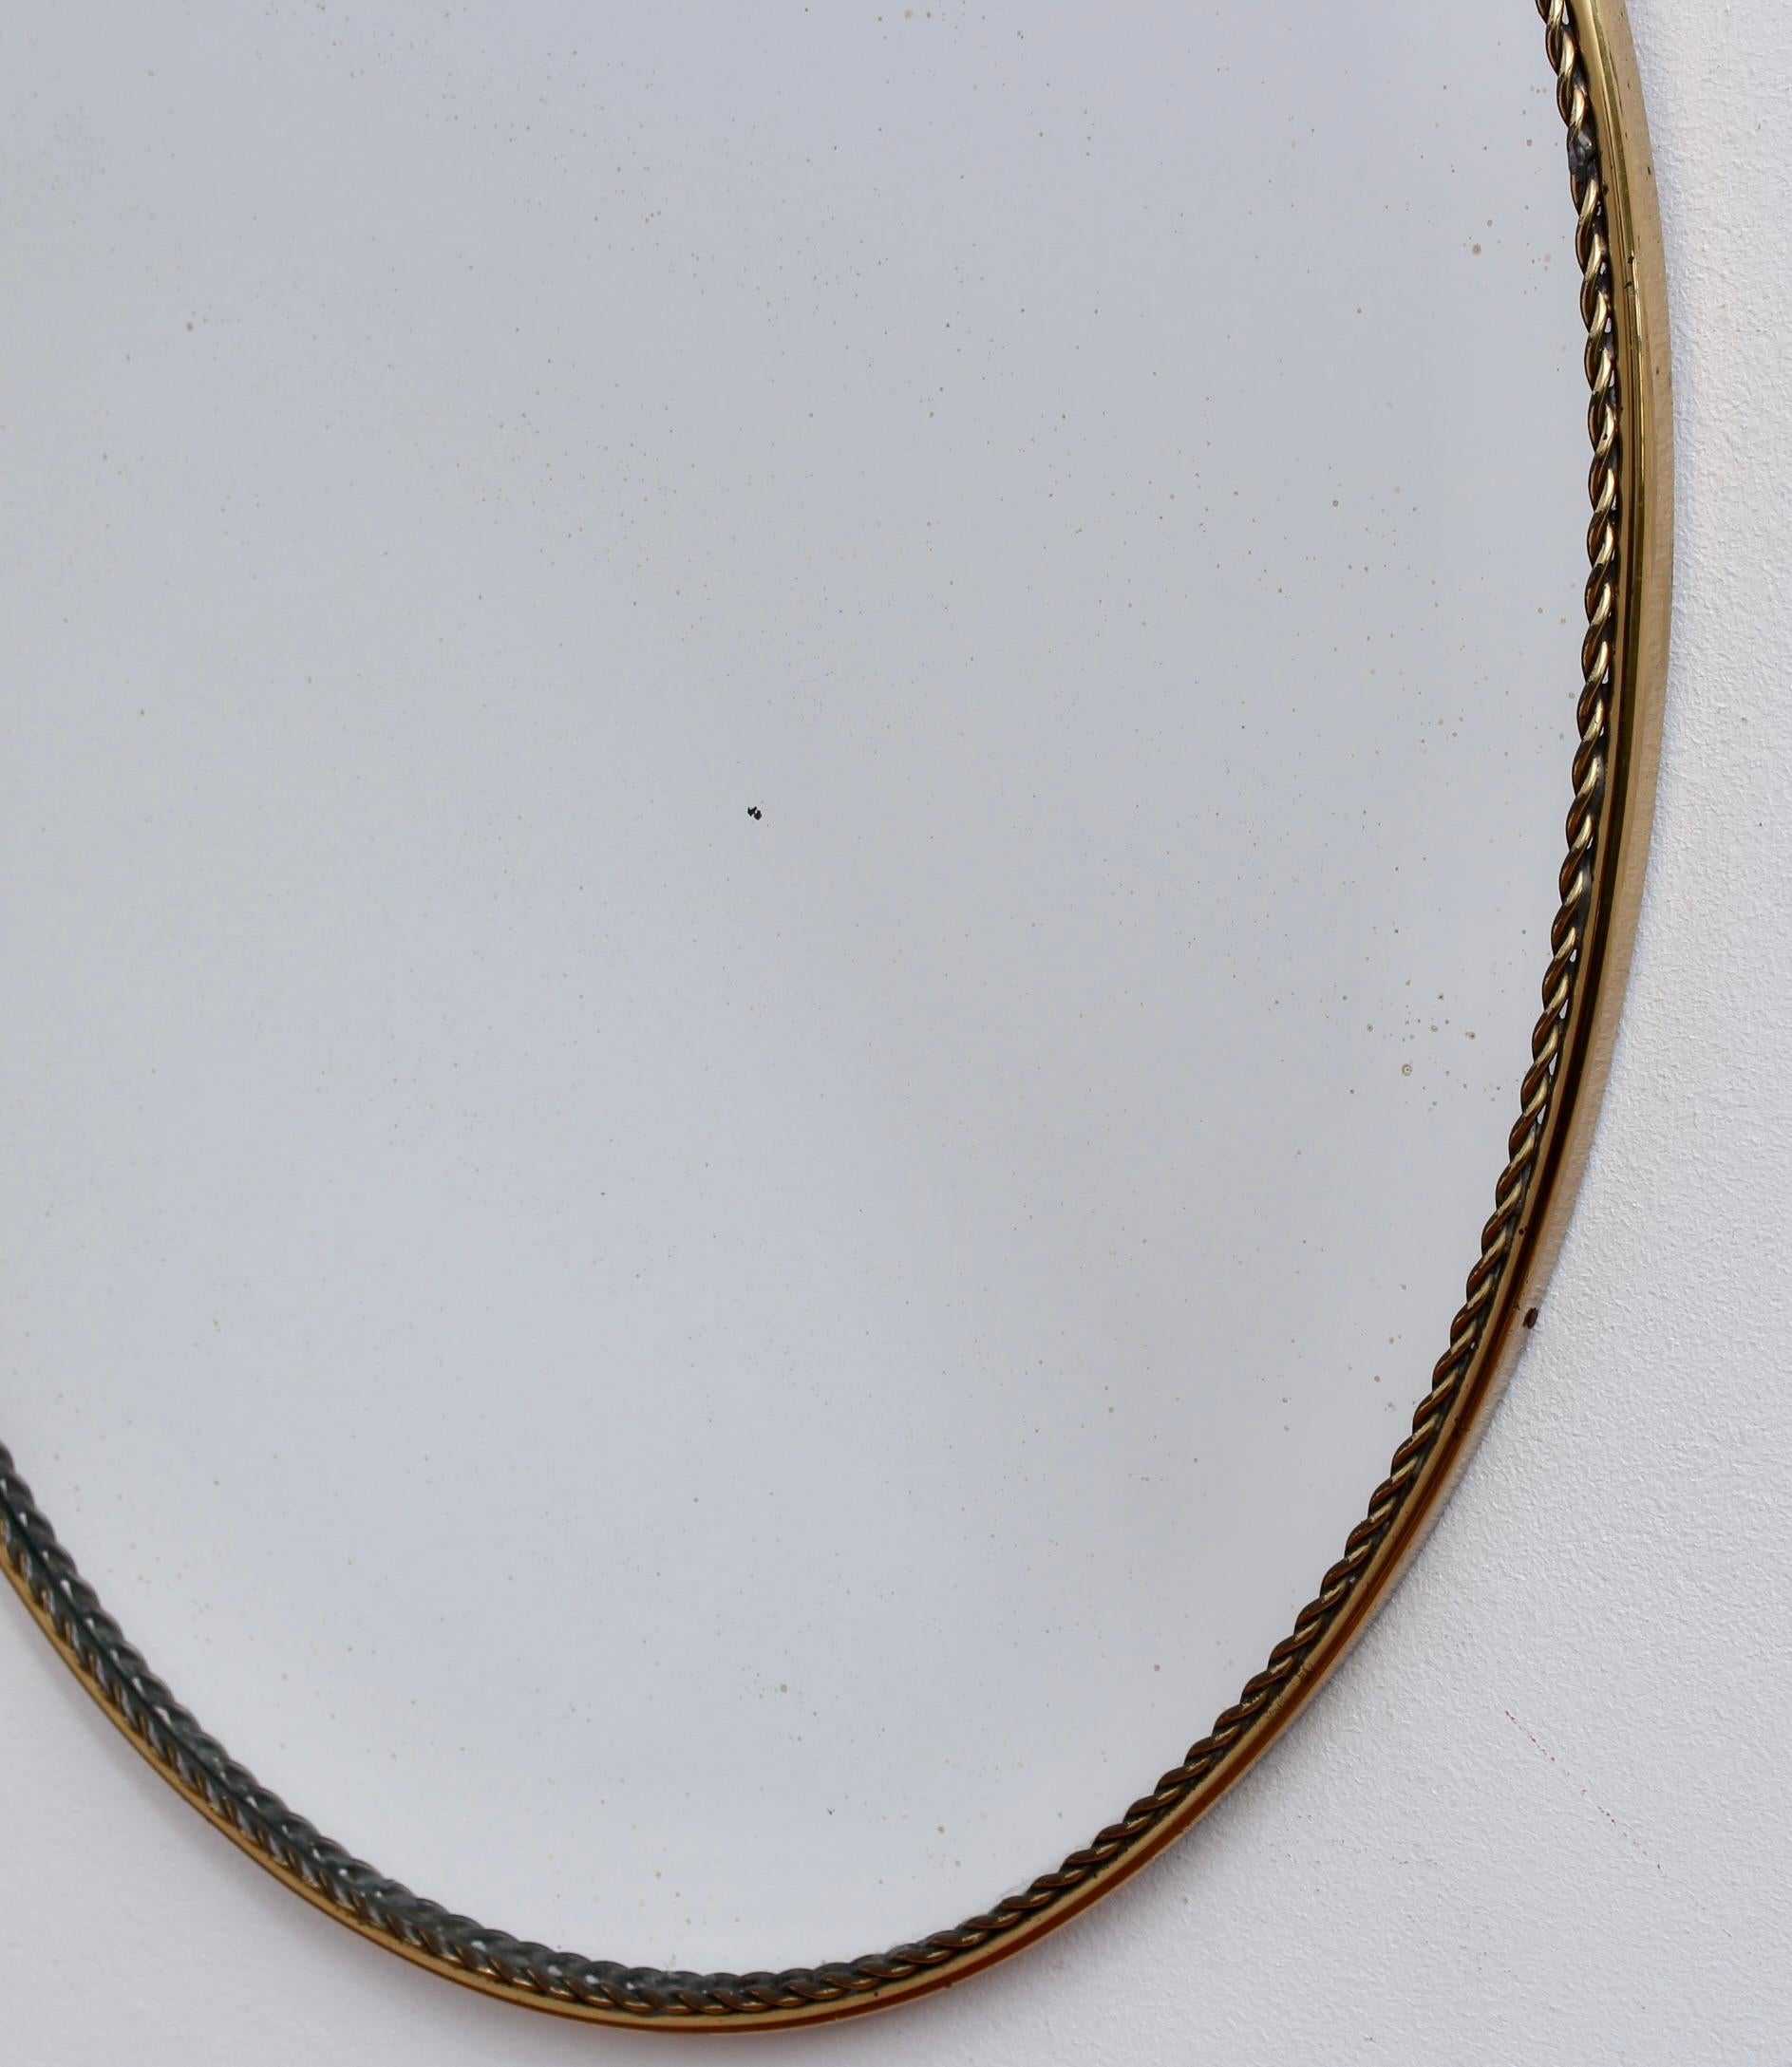 Vintage Italian Oval Wall Mirror in Brass Frame (circa 1950s) - Small 3